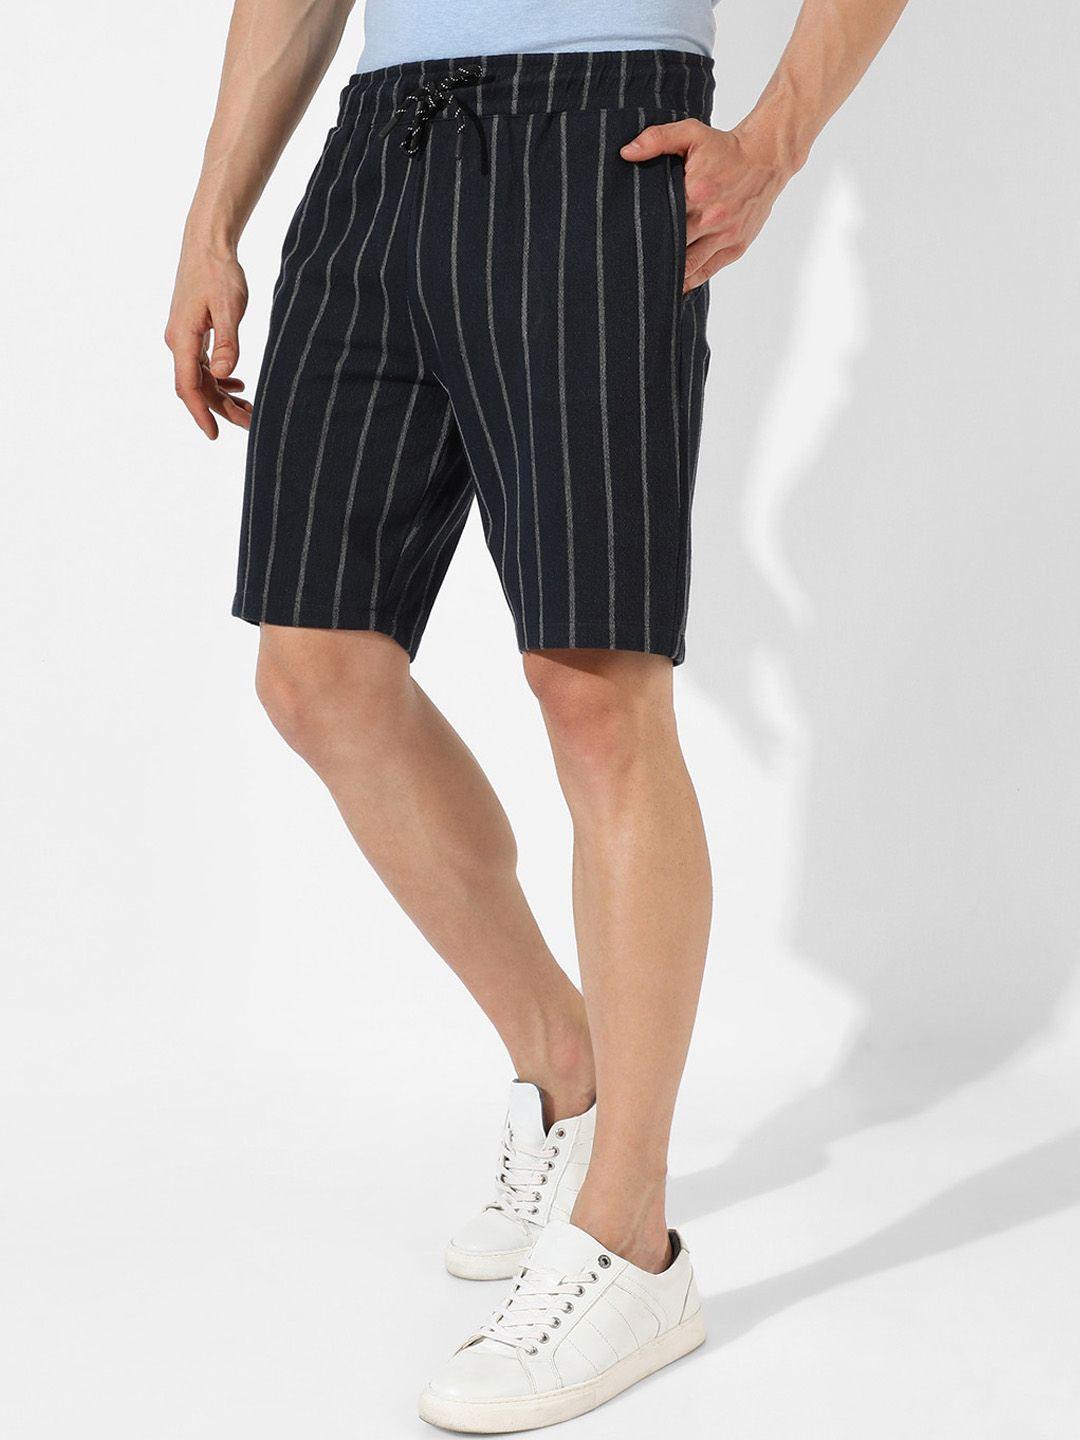 campus-sutra-men-striped-cotton-regular-fit-mid-rise-shorts